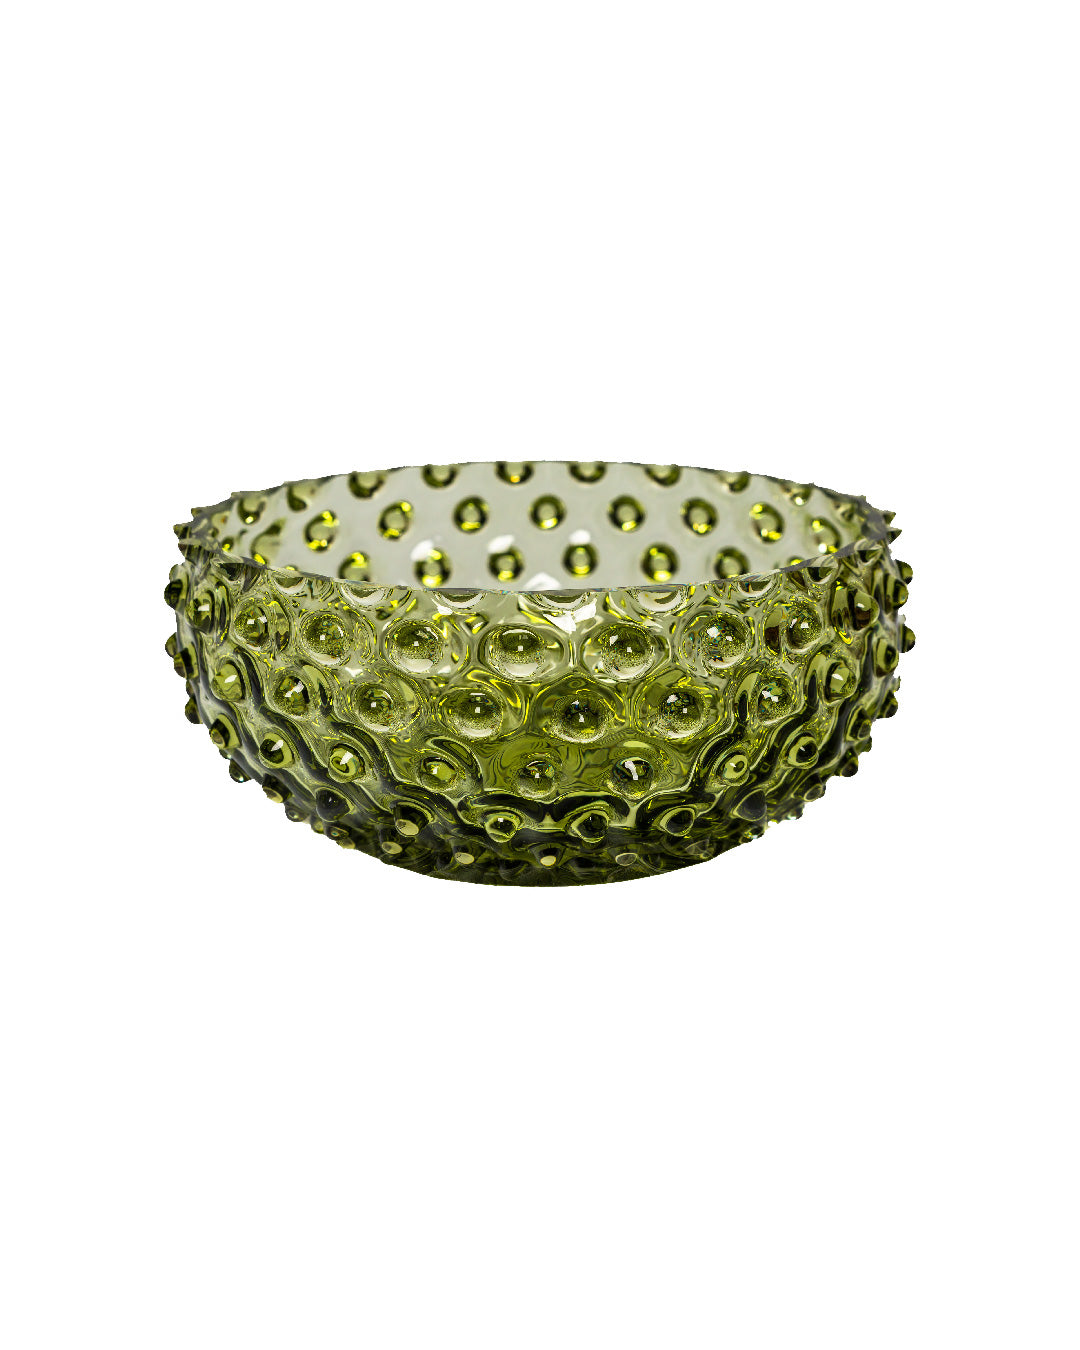 Small Hobnail Bowl | Undisclosed